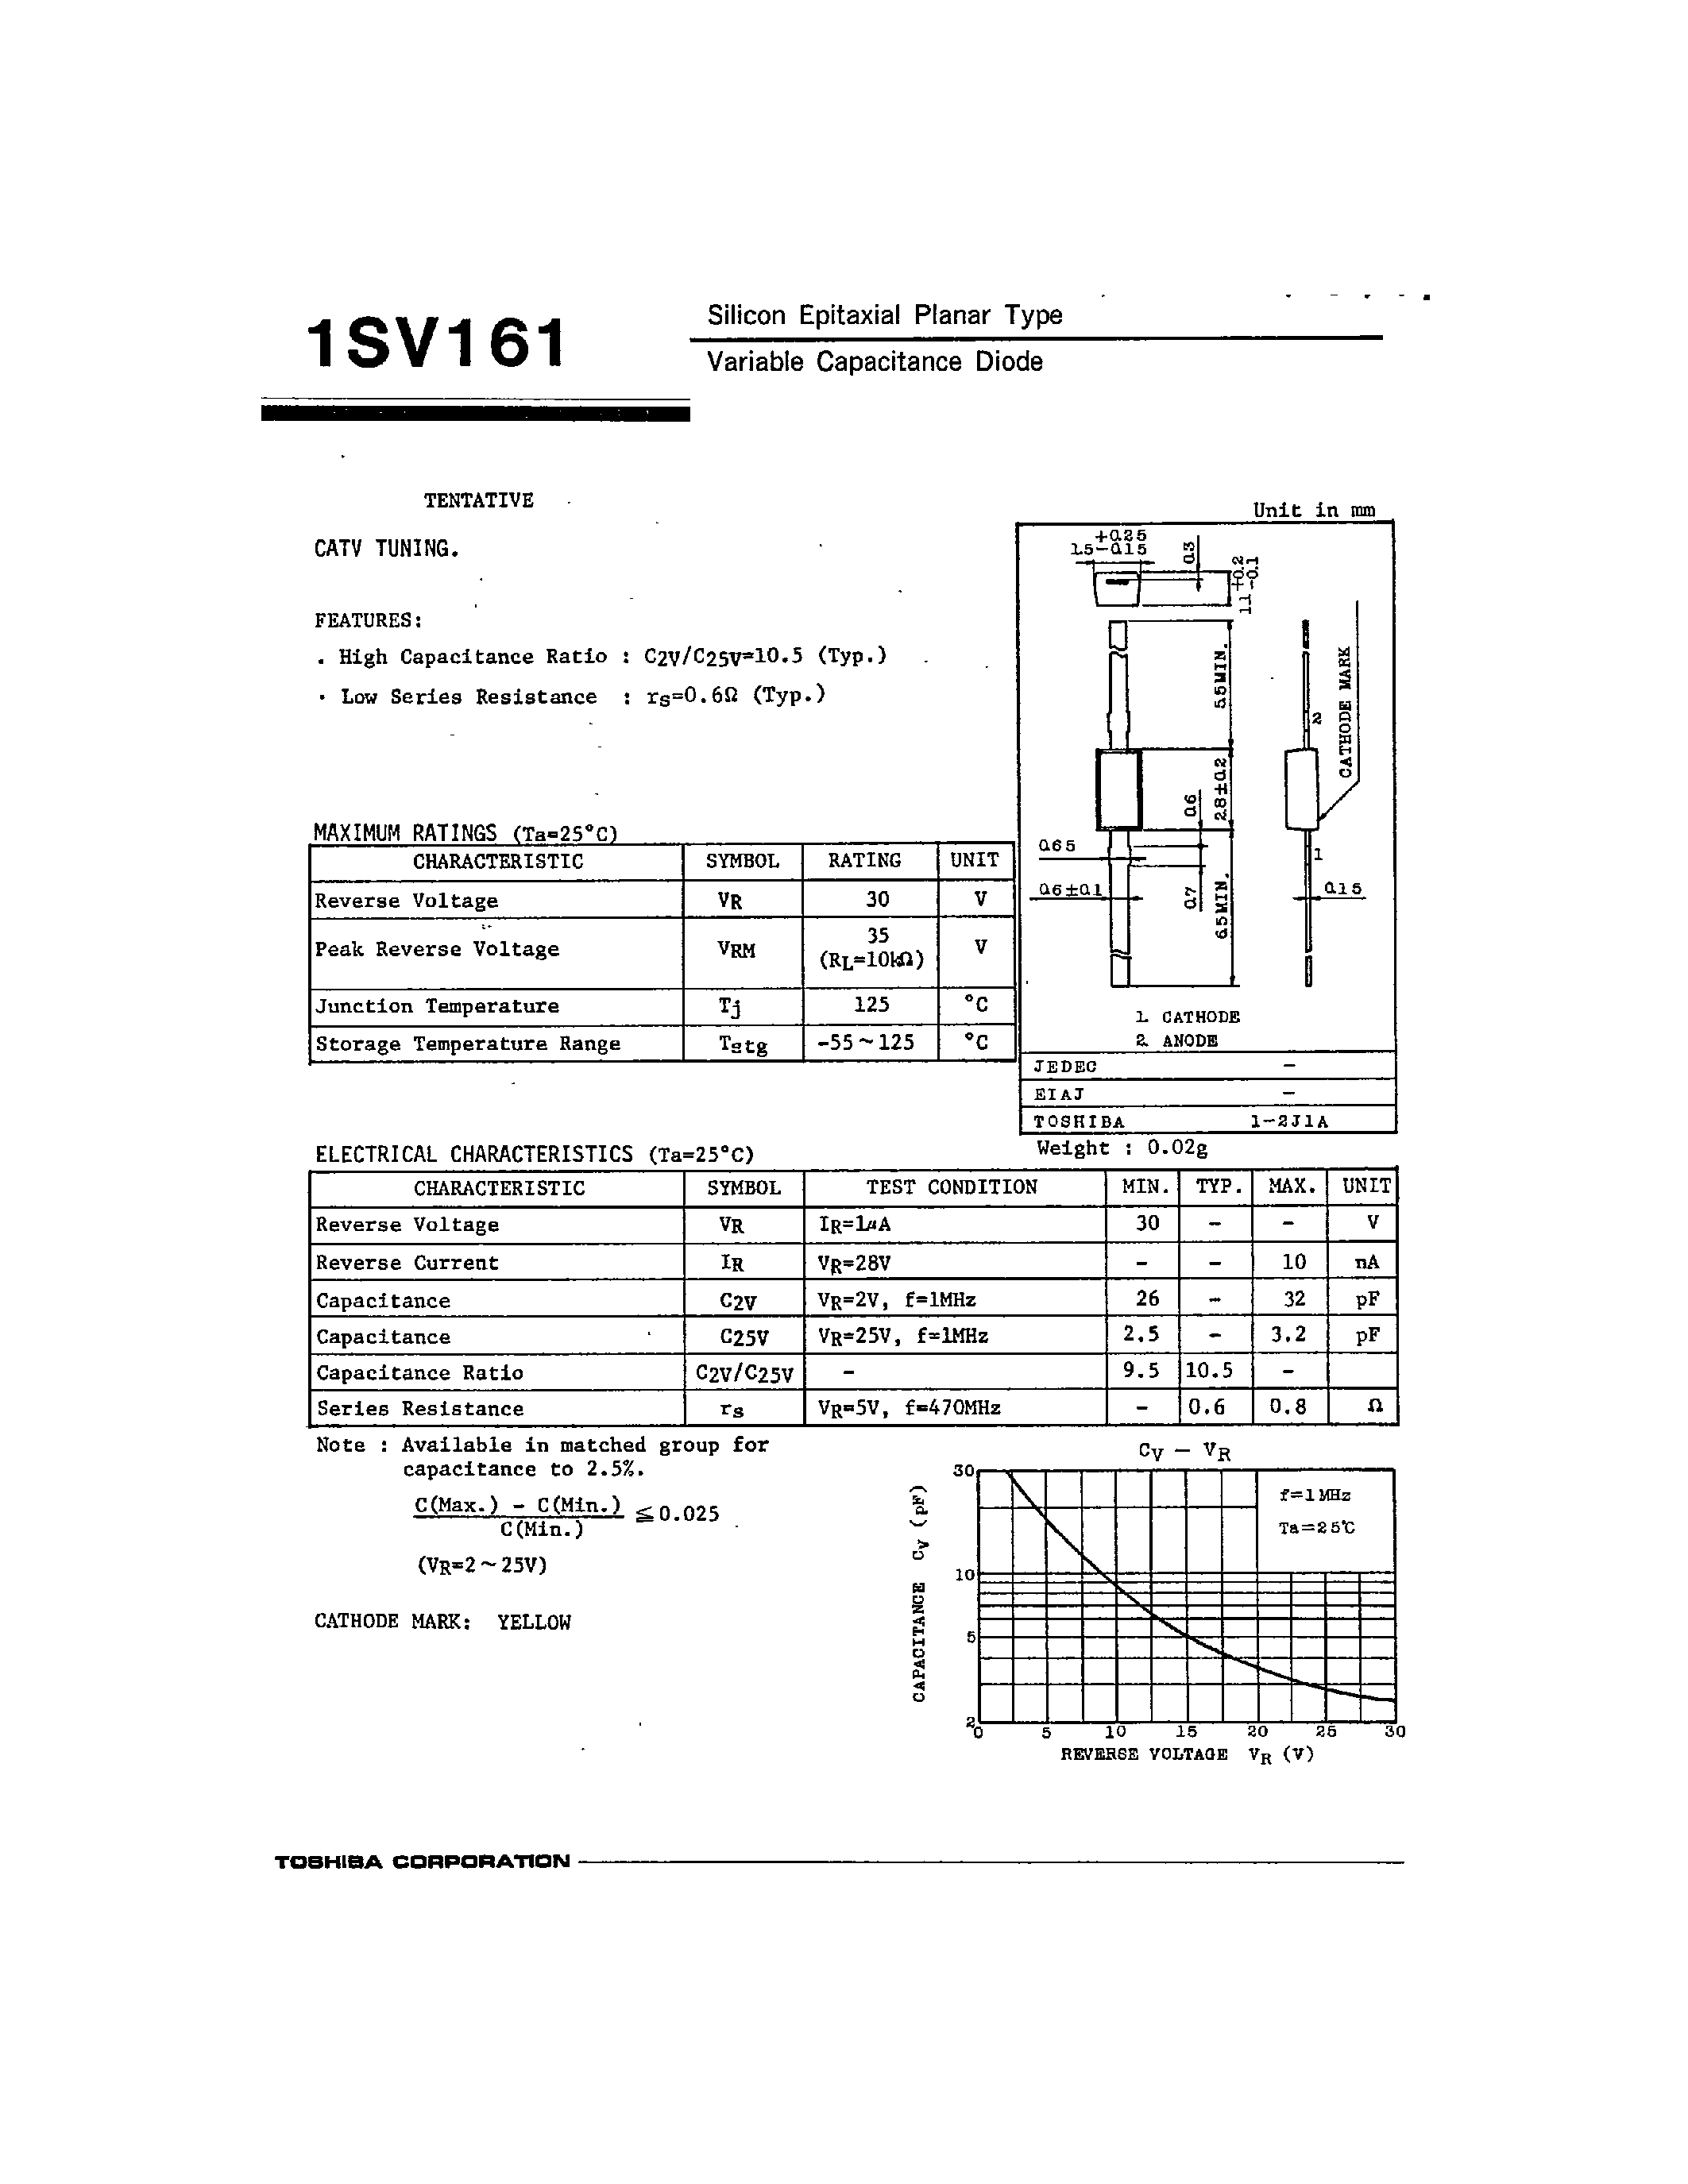 Datasheet 1SV161 - Silicon Epitaxial Planar Type Variable Capacitance Diode page 1